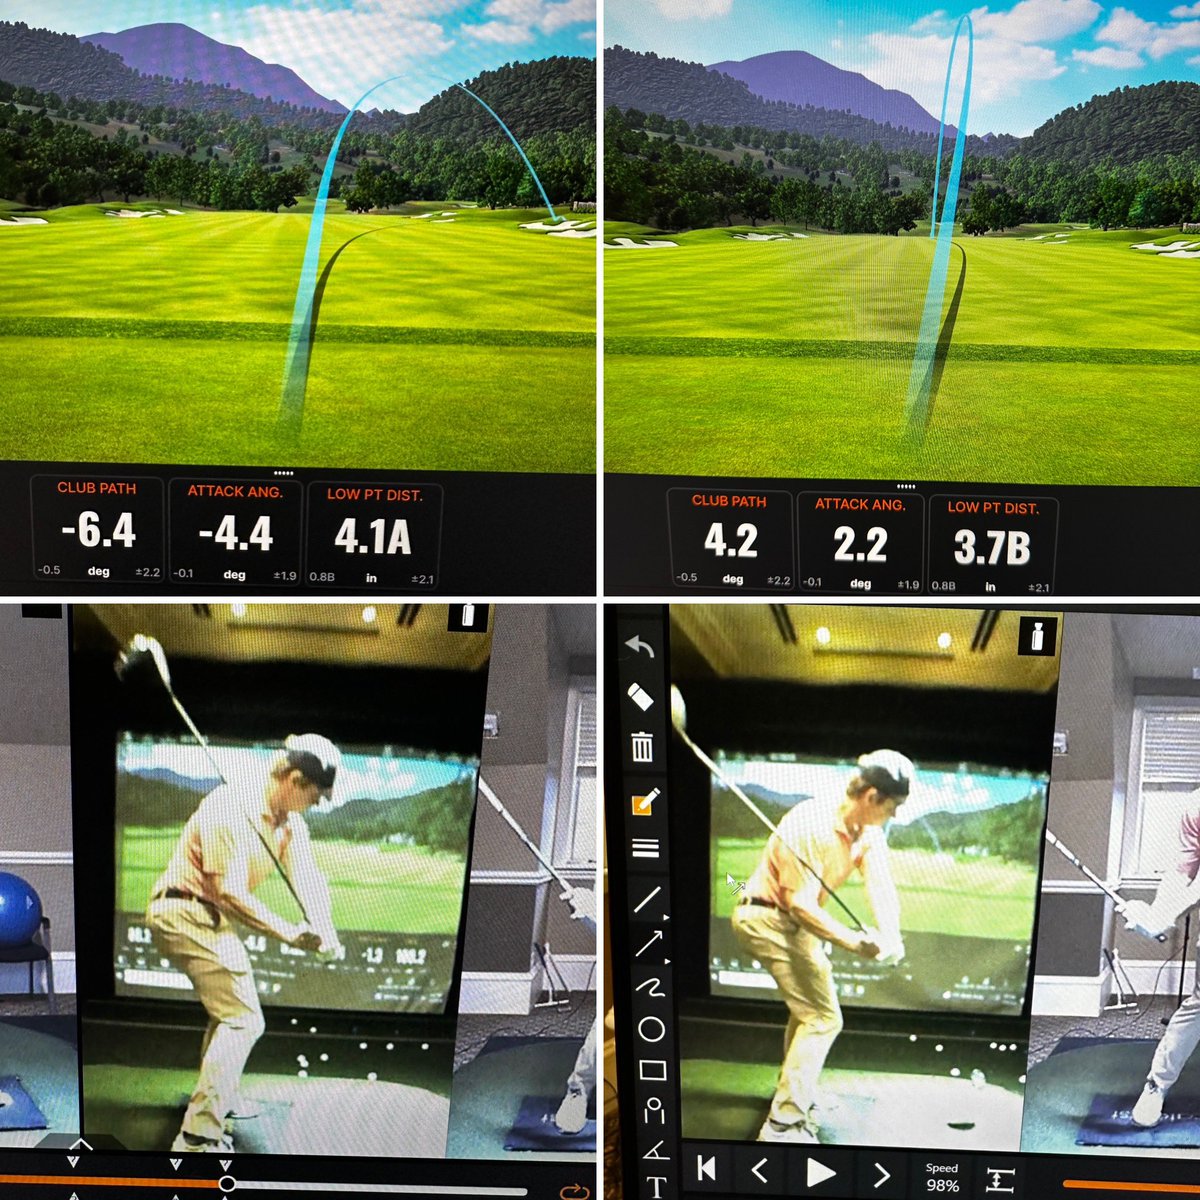 Nice numbers and ball flight changes here. From big banana slices with downward attack angle and low point ahead. To strong draws with attack angle up and low point behind! Big path change helped. 👌🏼⛳️💪🏼🔥